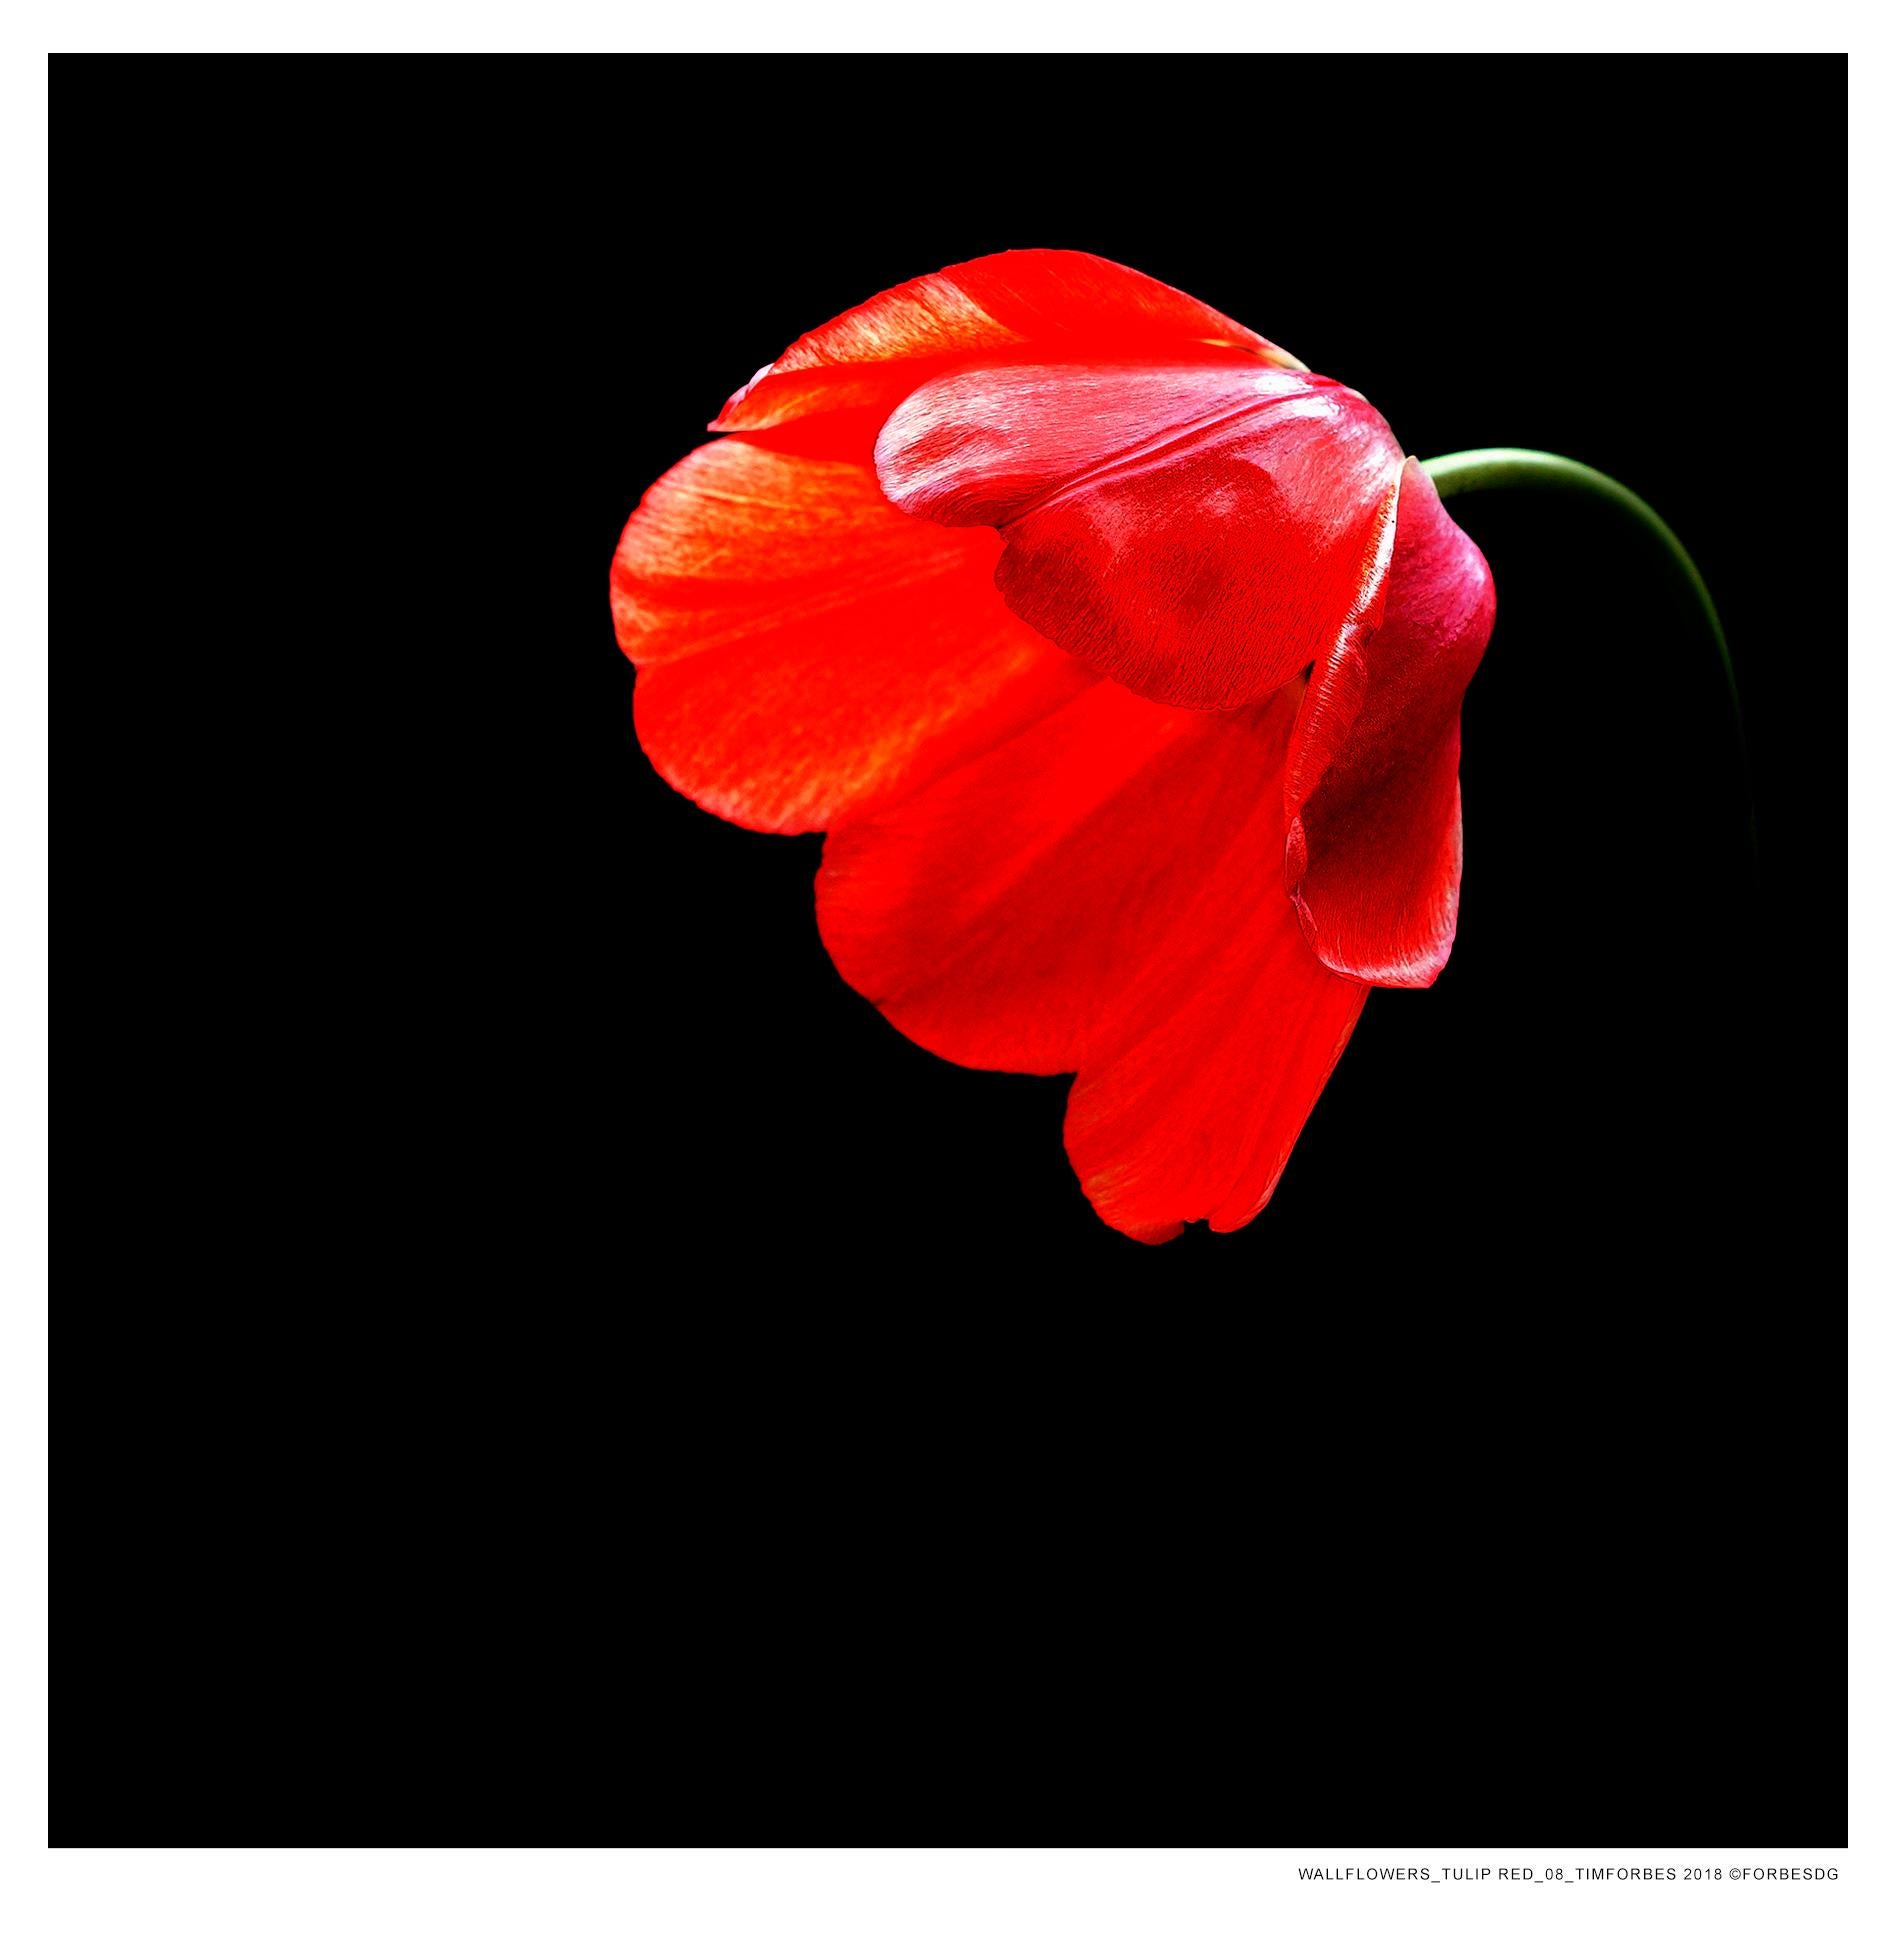 LIMITED EDITION Wall Tulip Series by Canadian photo-artist Tim Forbes. “What more hopeful imagery than classic portraits of spring tulips shot in the natural light of the artist’s studio?”  Choices from this elegant series brings style and warmth to